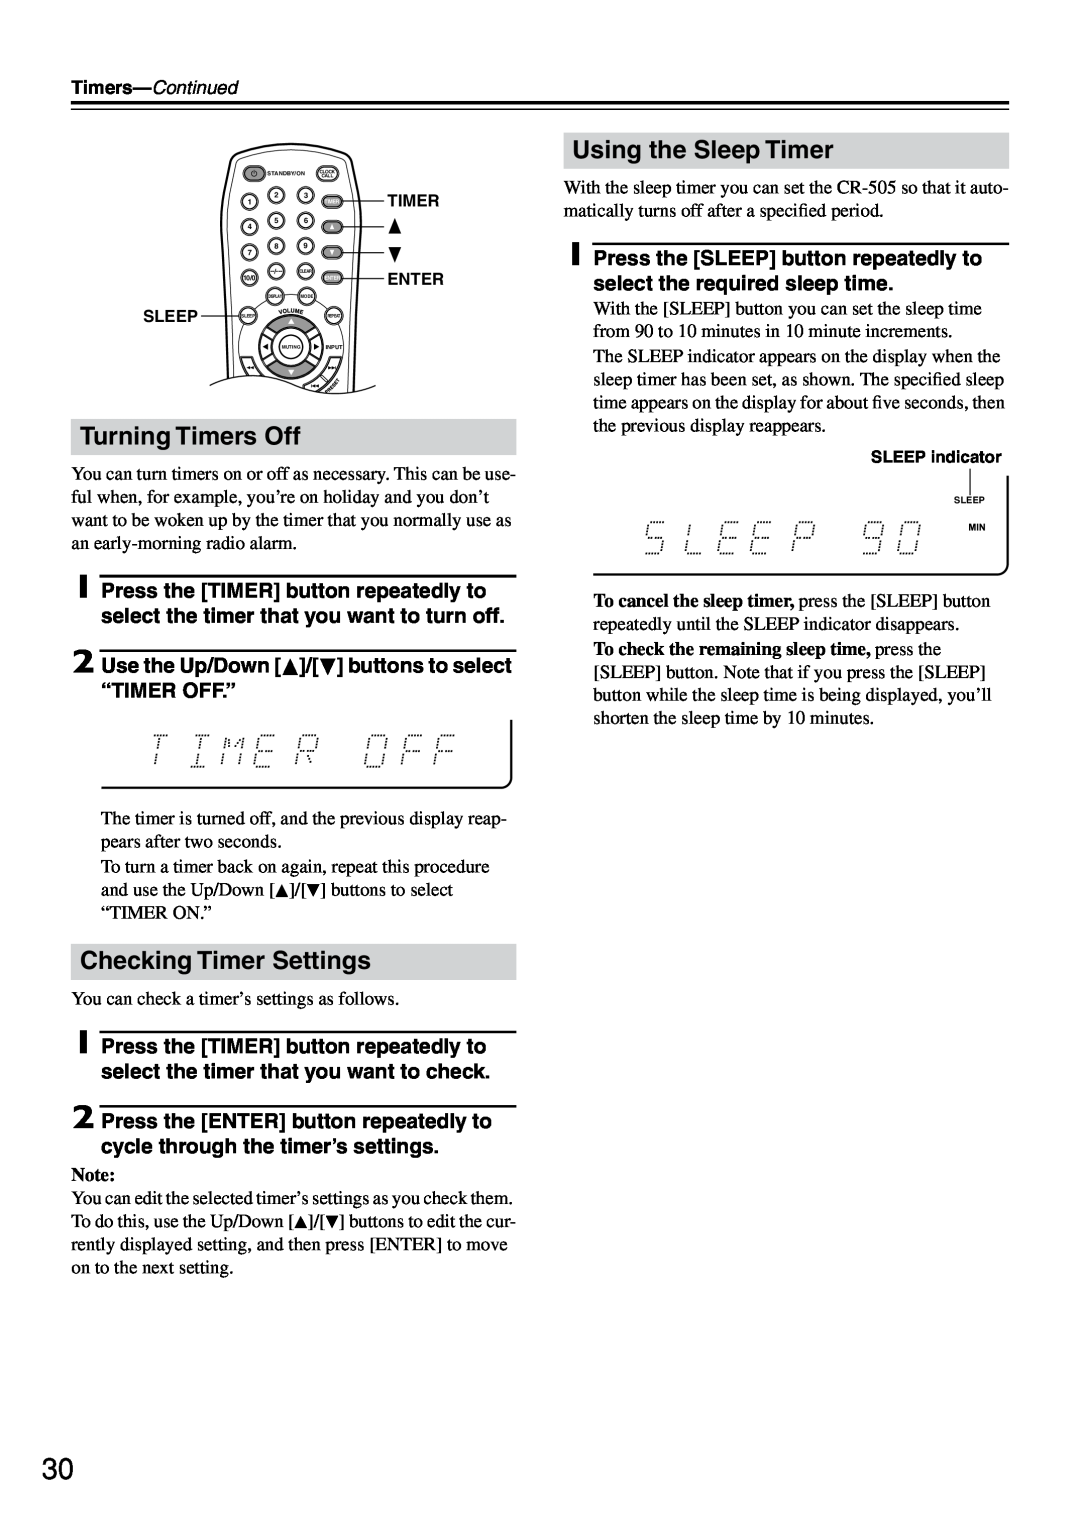 Onkyo CR-505 instruction manual Turning Timers Off, Checking Timer Settings, Using the Sleep Timer 